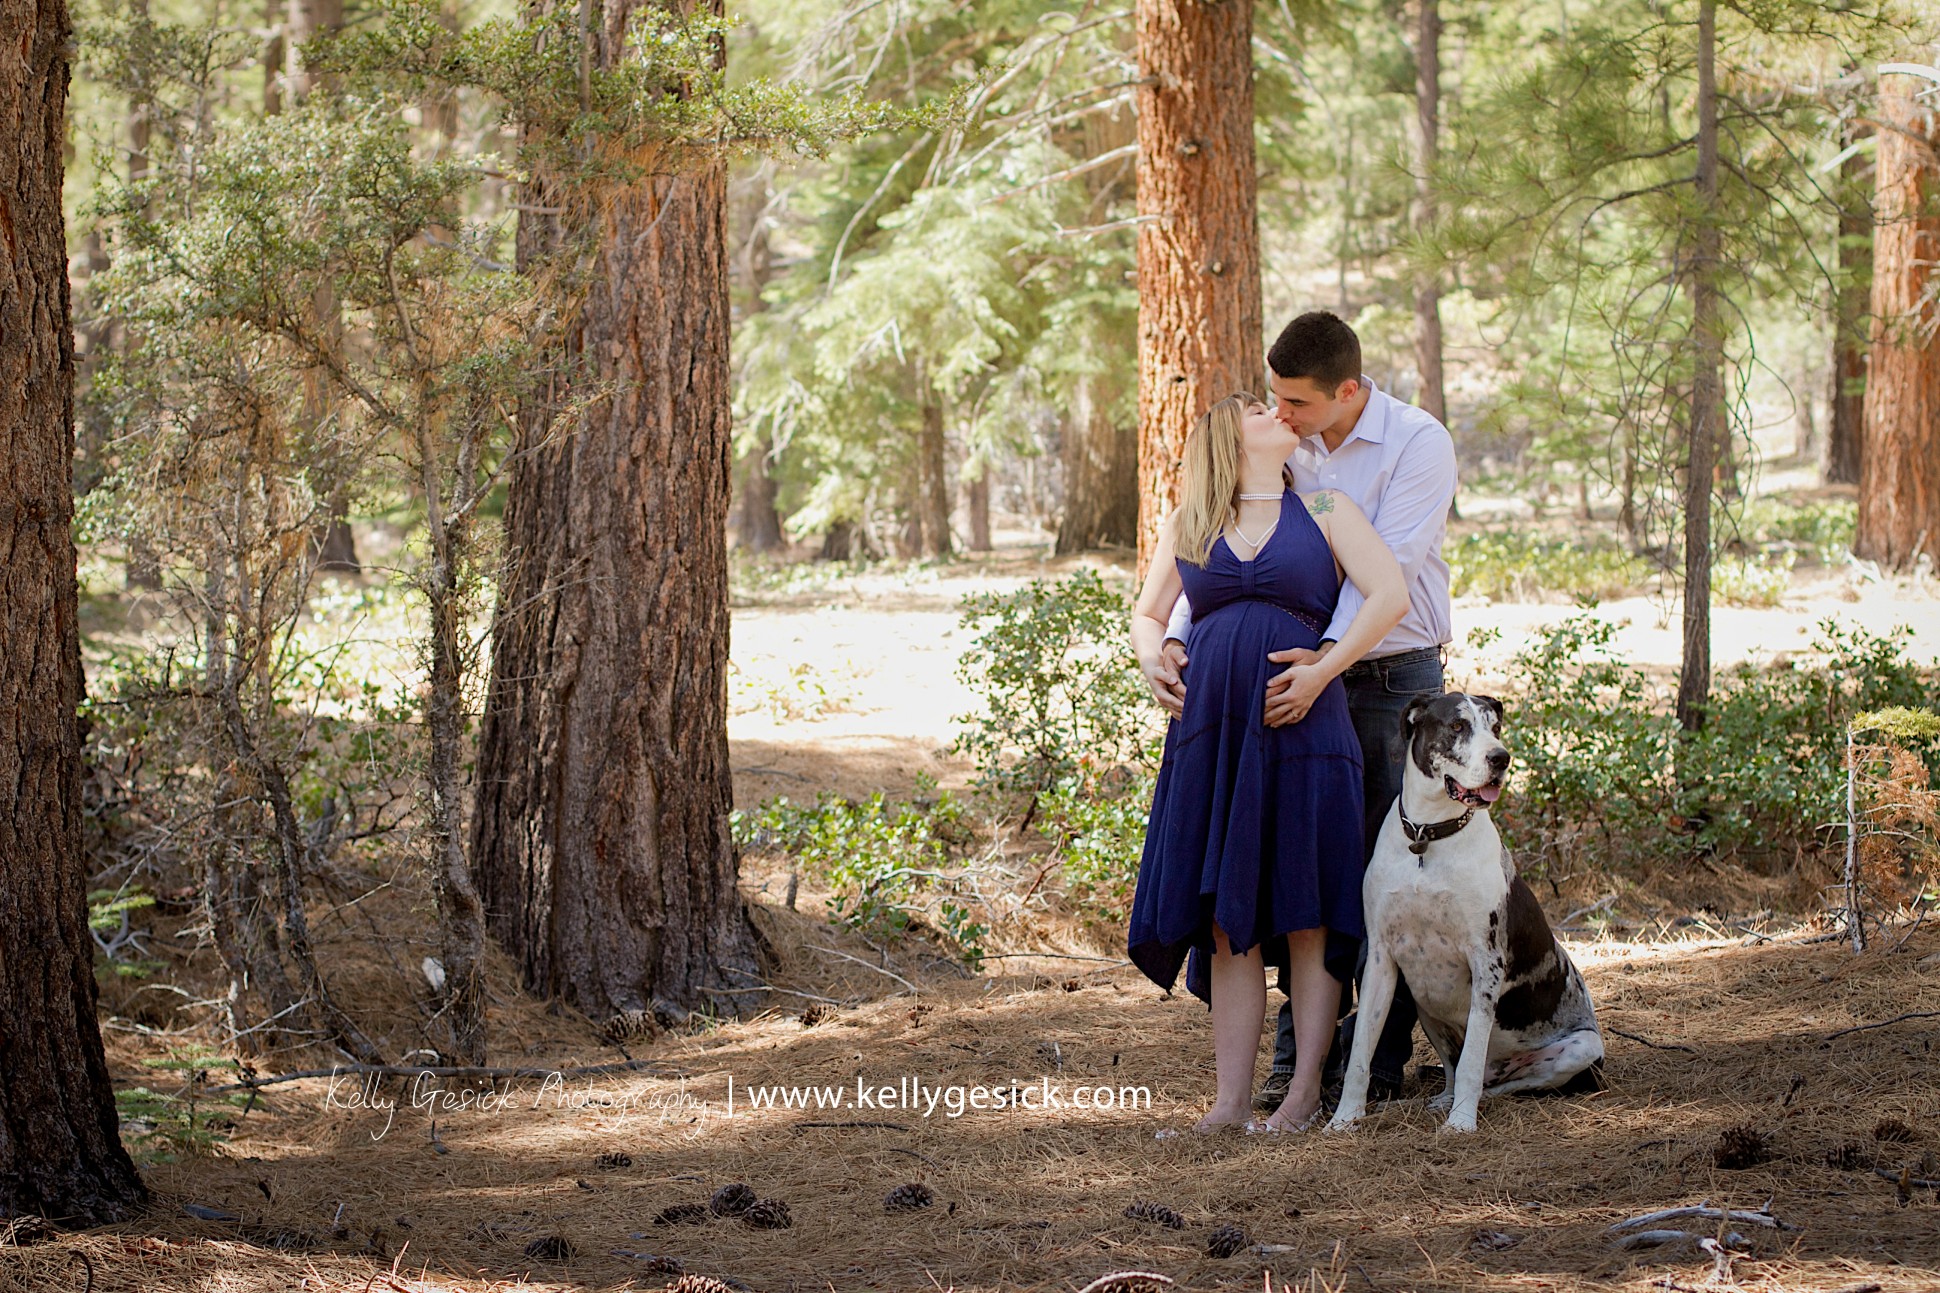 Blaise and Josh's maternity portraits of baby Ender at Galena Creek